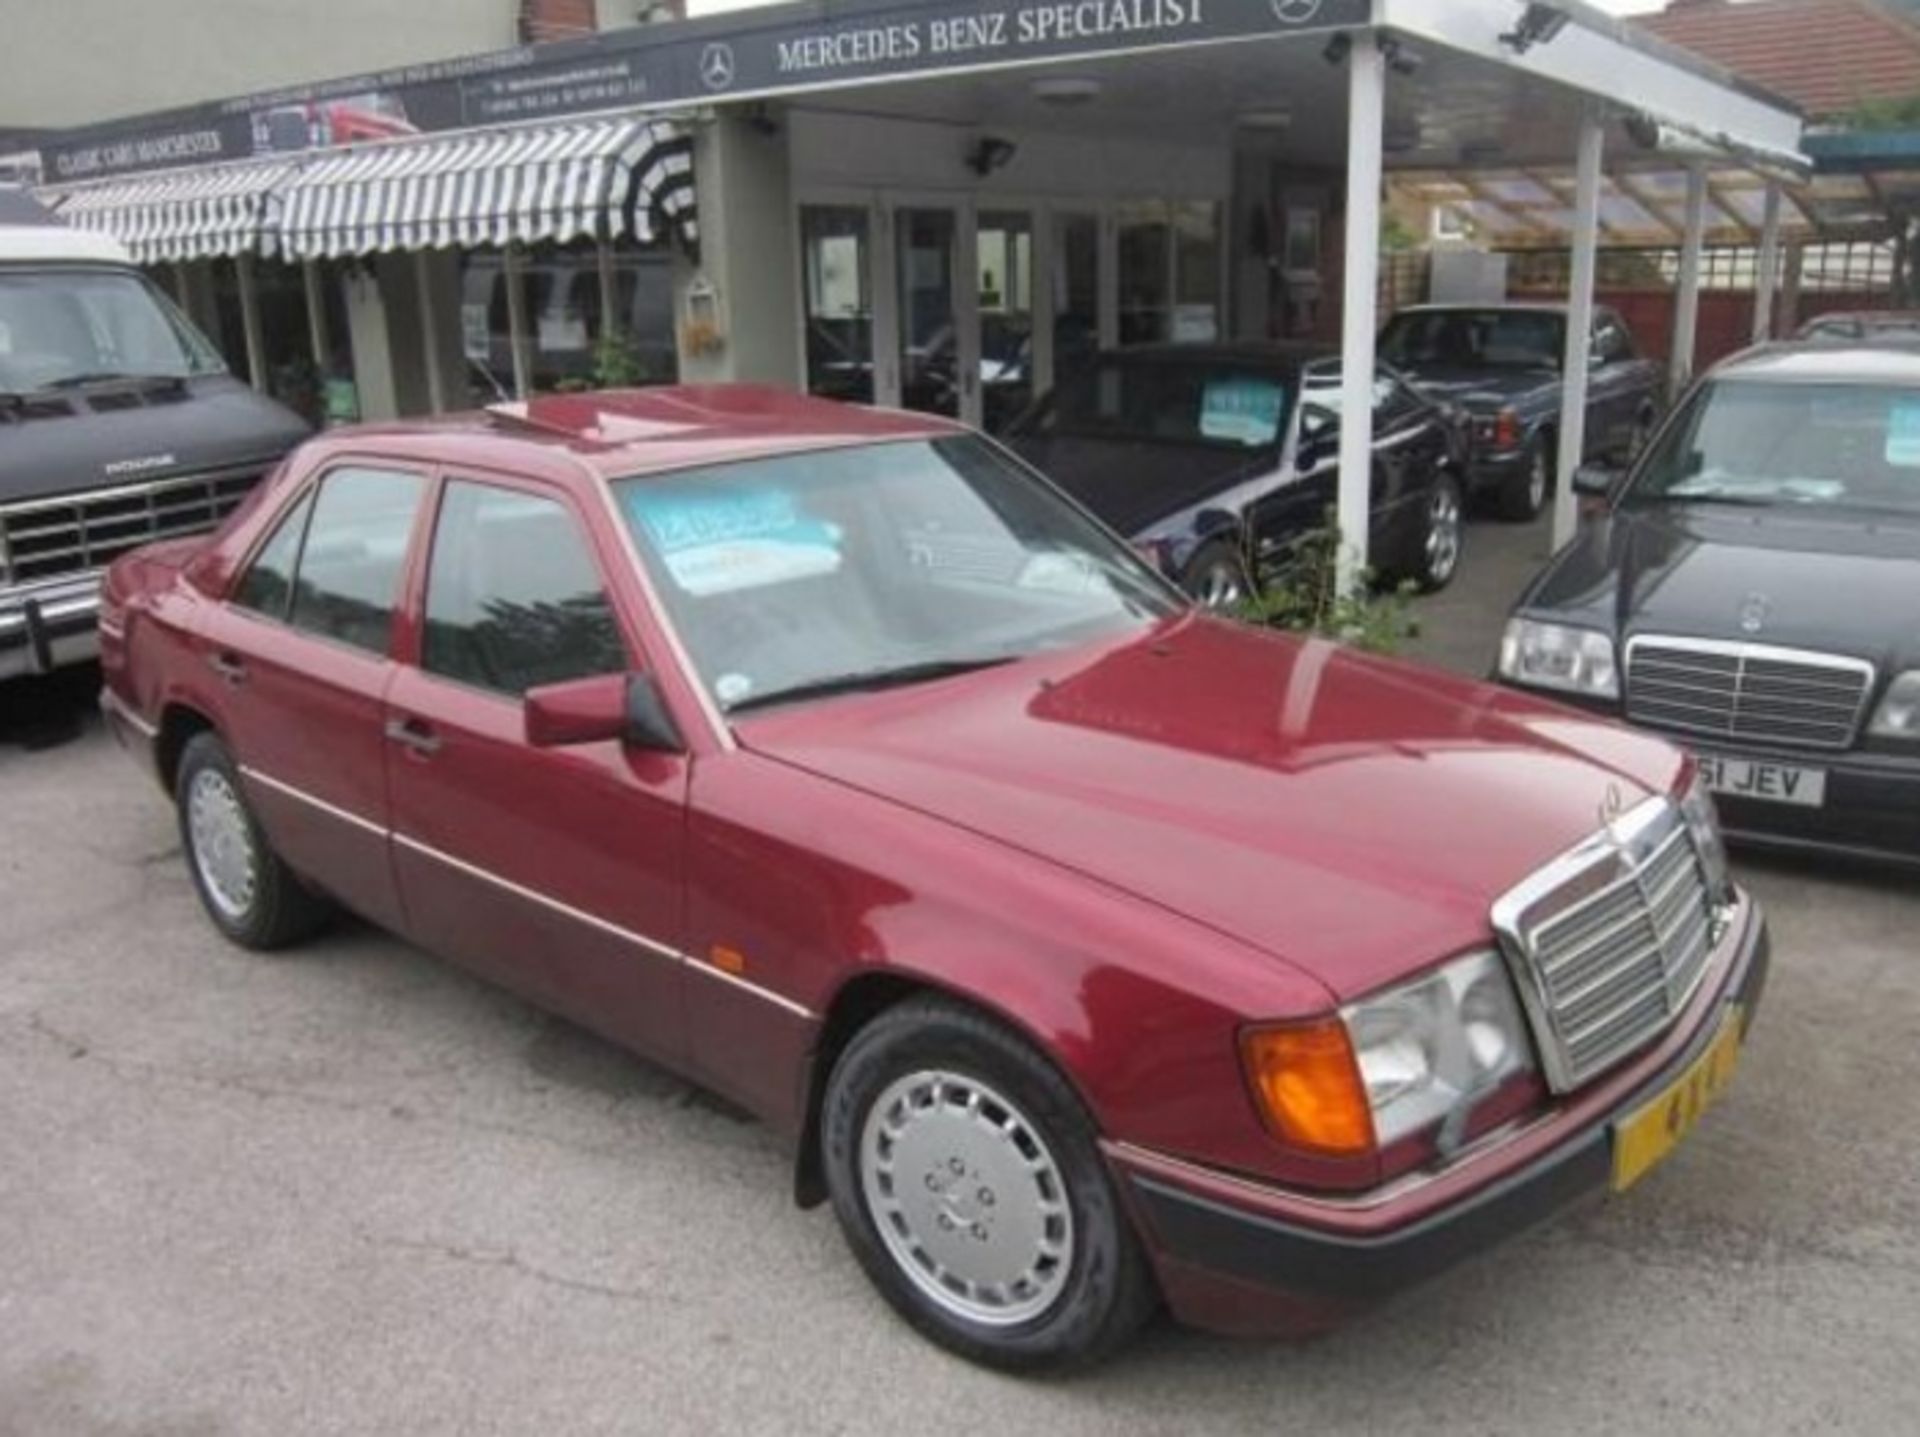 1980 Mercedes-Benz 300 E – 4 Matic (4WD) (Metallic Ruby Red) - Image 4 of 14